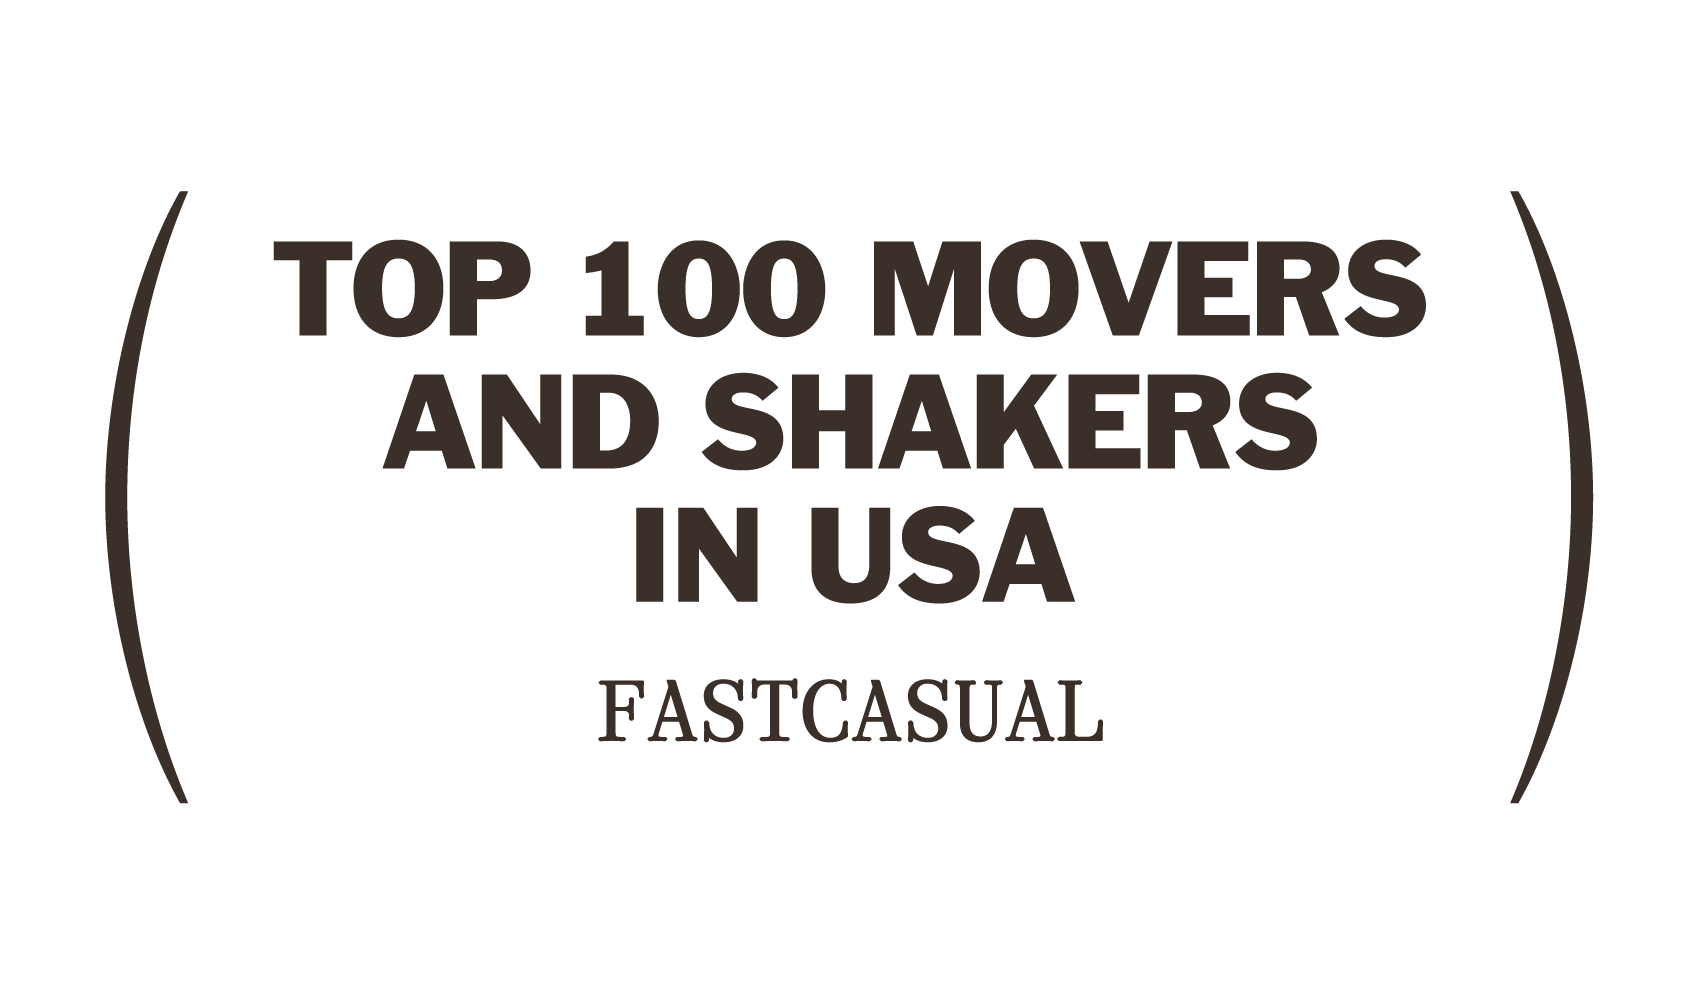 TOP 100 MOVERS AND SHAKERS IN USA